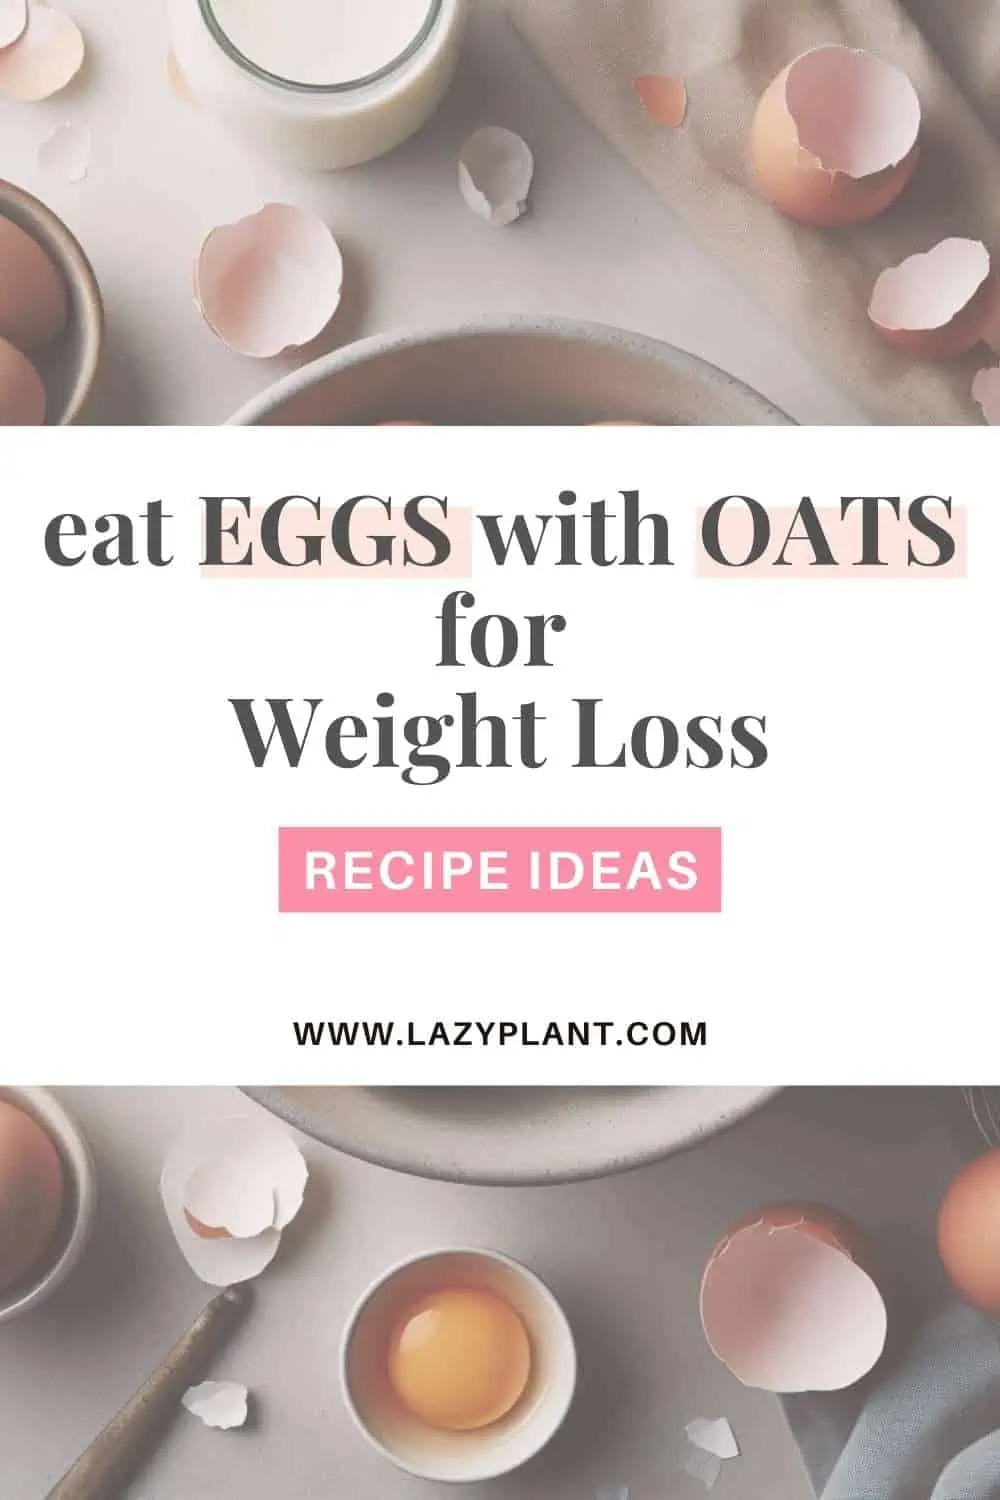 Combine Eggs with Oats in your recipes for Weight Loss.